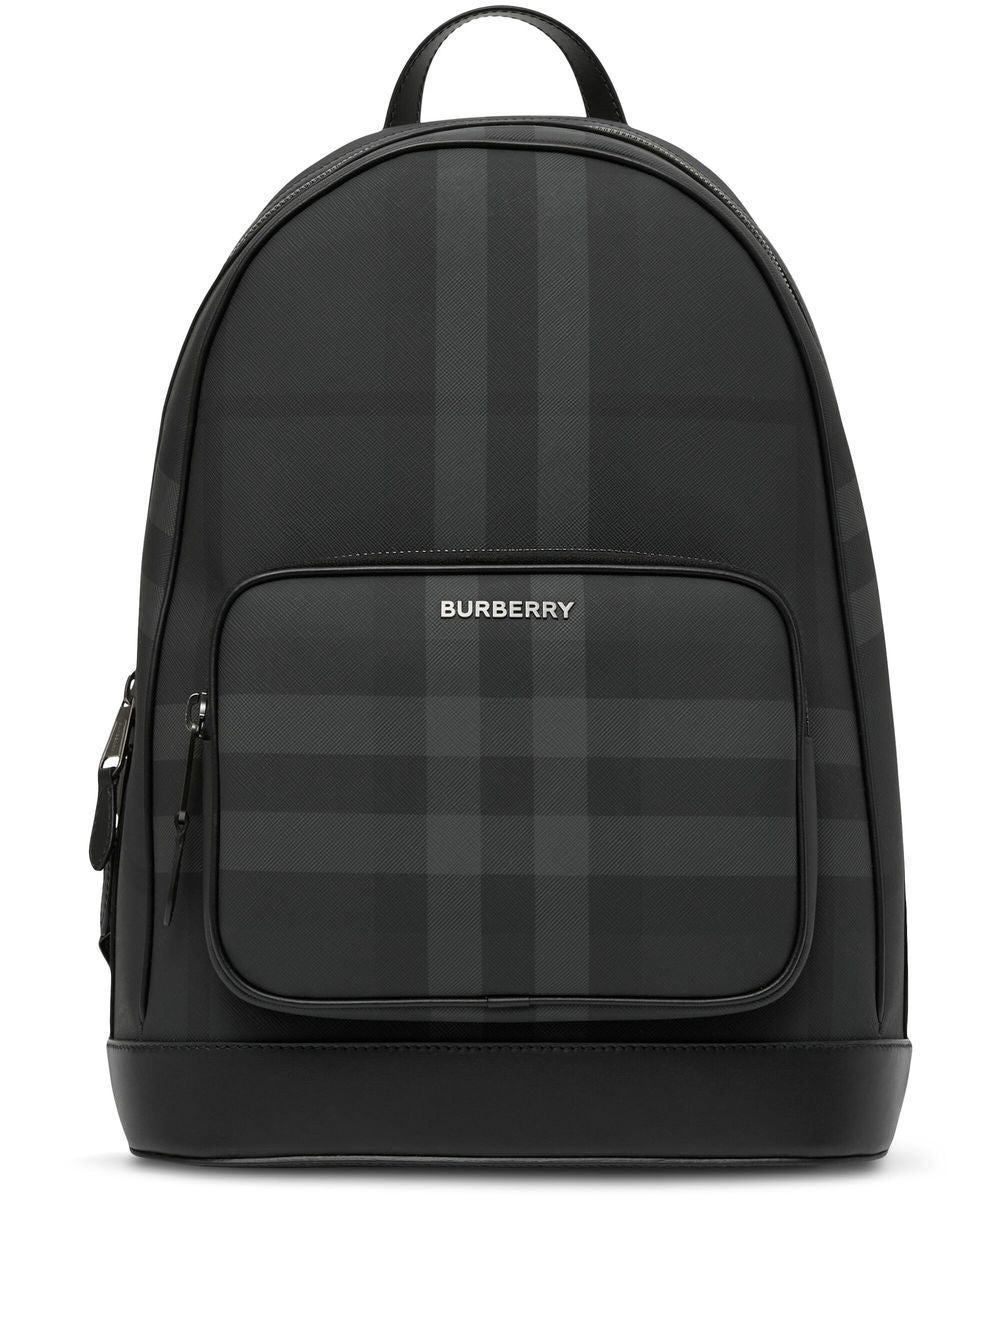 BURBERRY Charcoal Grey Nylon Backpack for Men